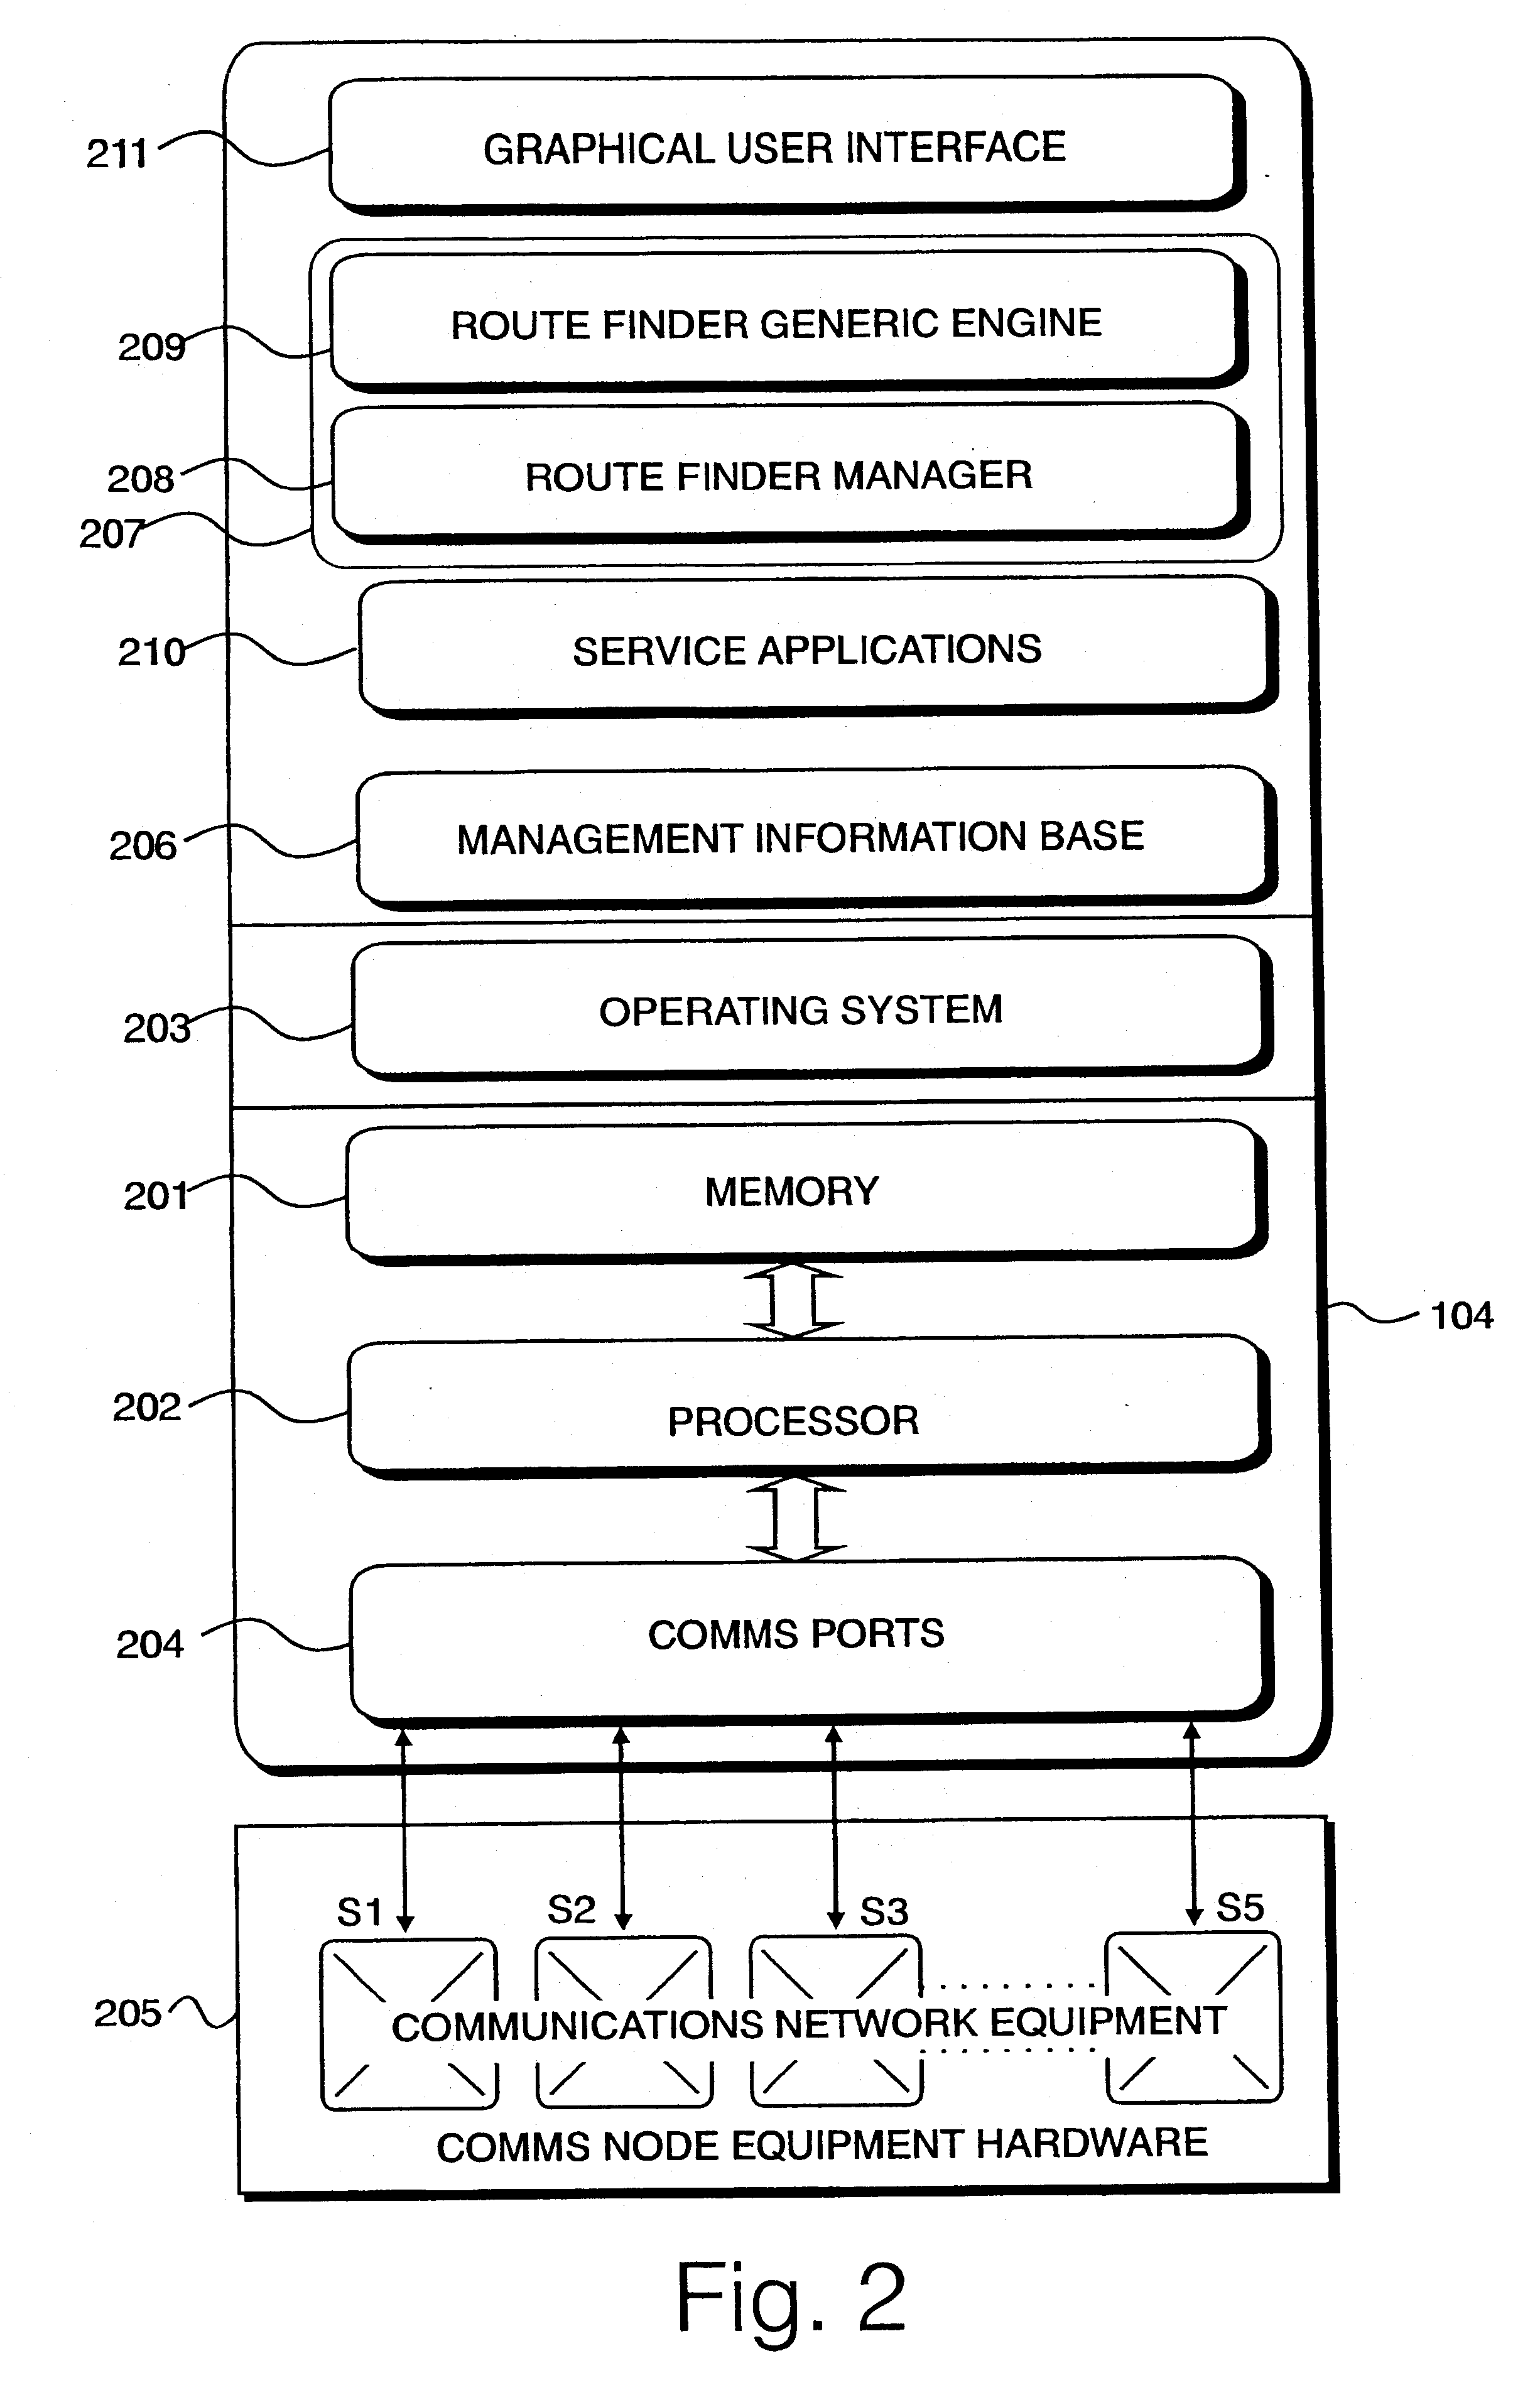 Traffic route finder in communications network